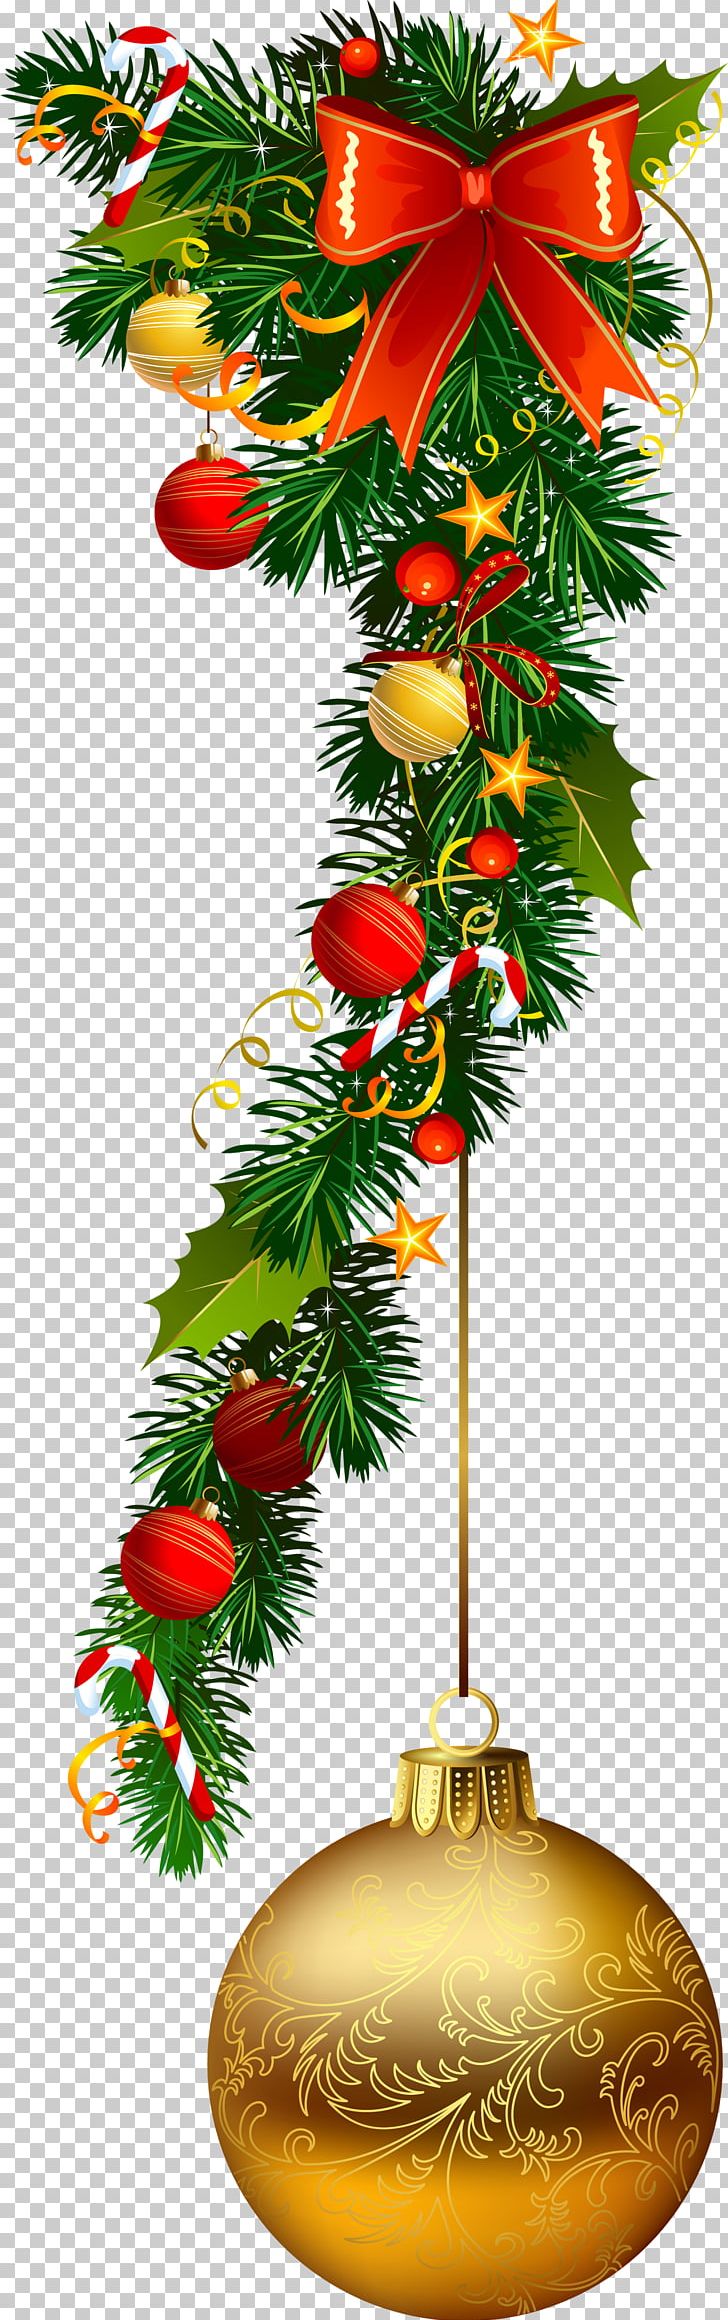 Santa Claus Christmas Ornament Christmas Decoration Garland PNG, Clipart, Branch, Christmas, Christmas Card, Christmas Decoration, Christmas Ornament Free PNG Download